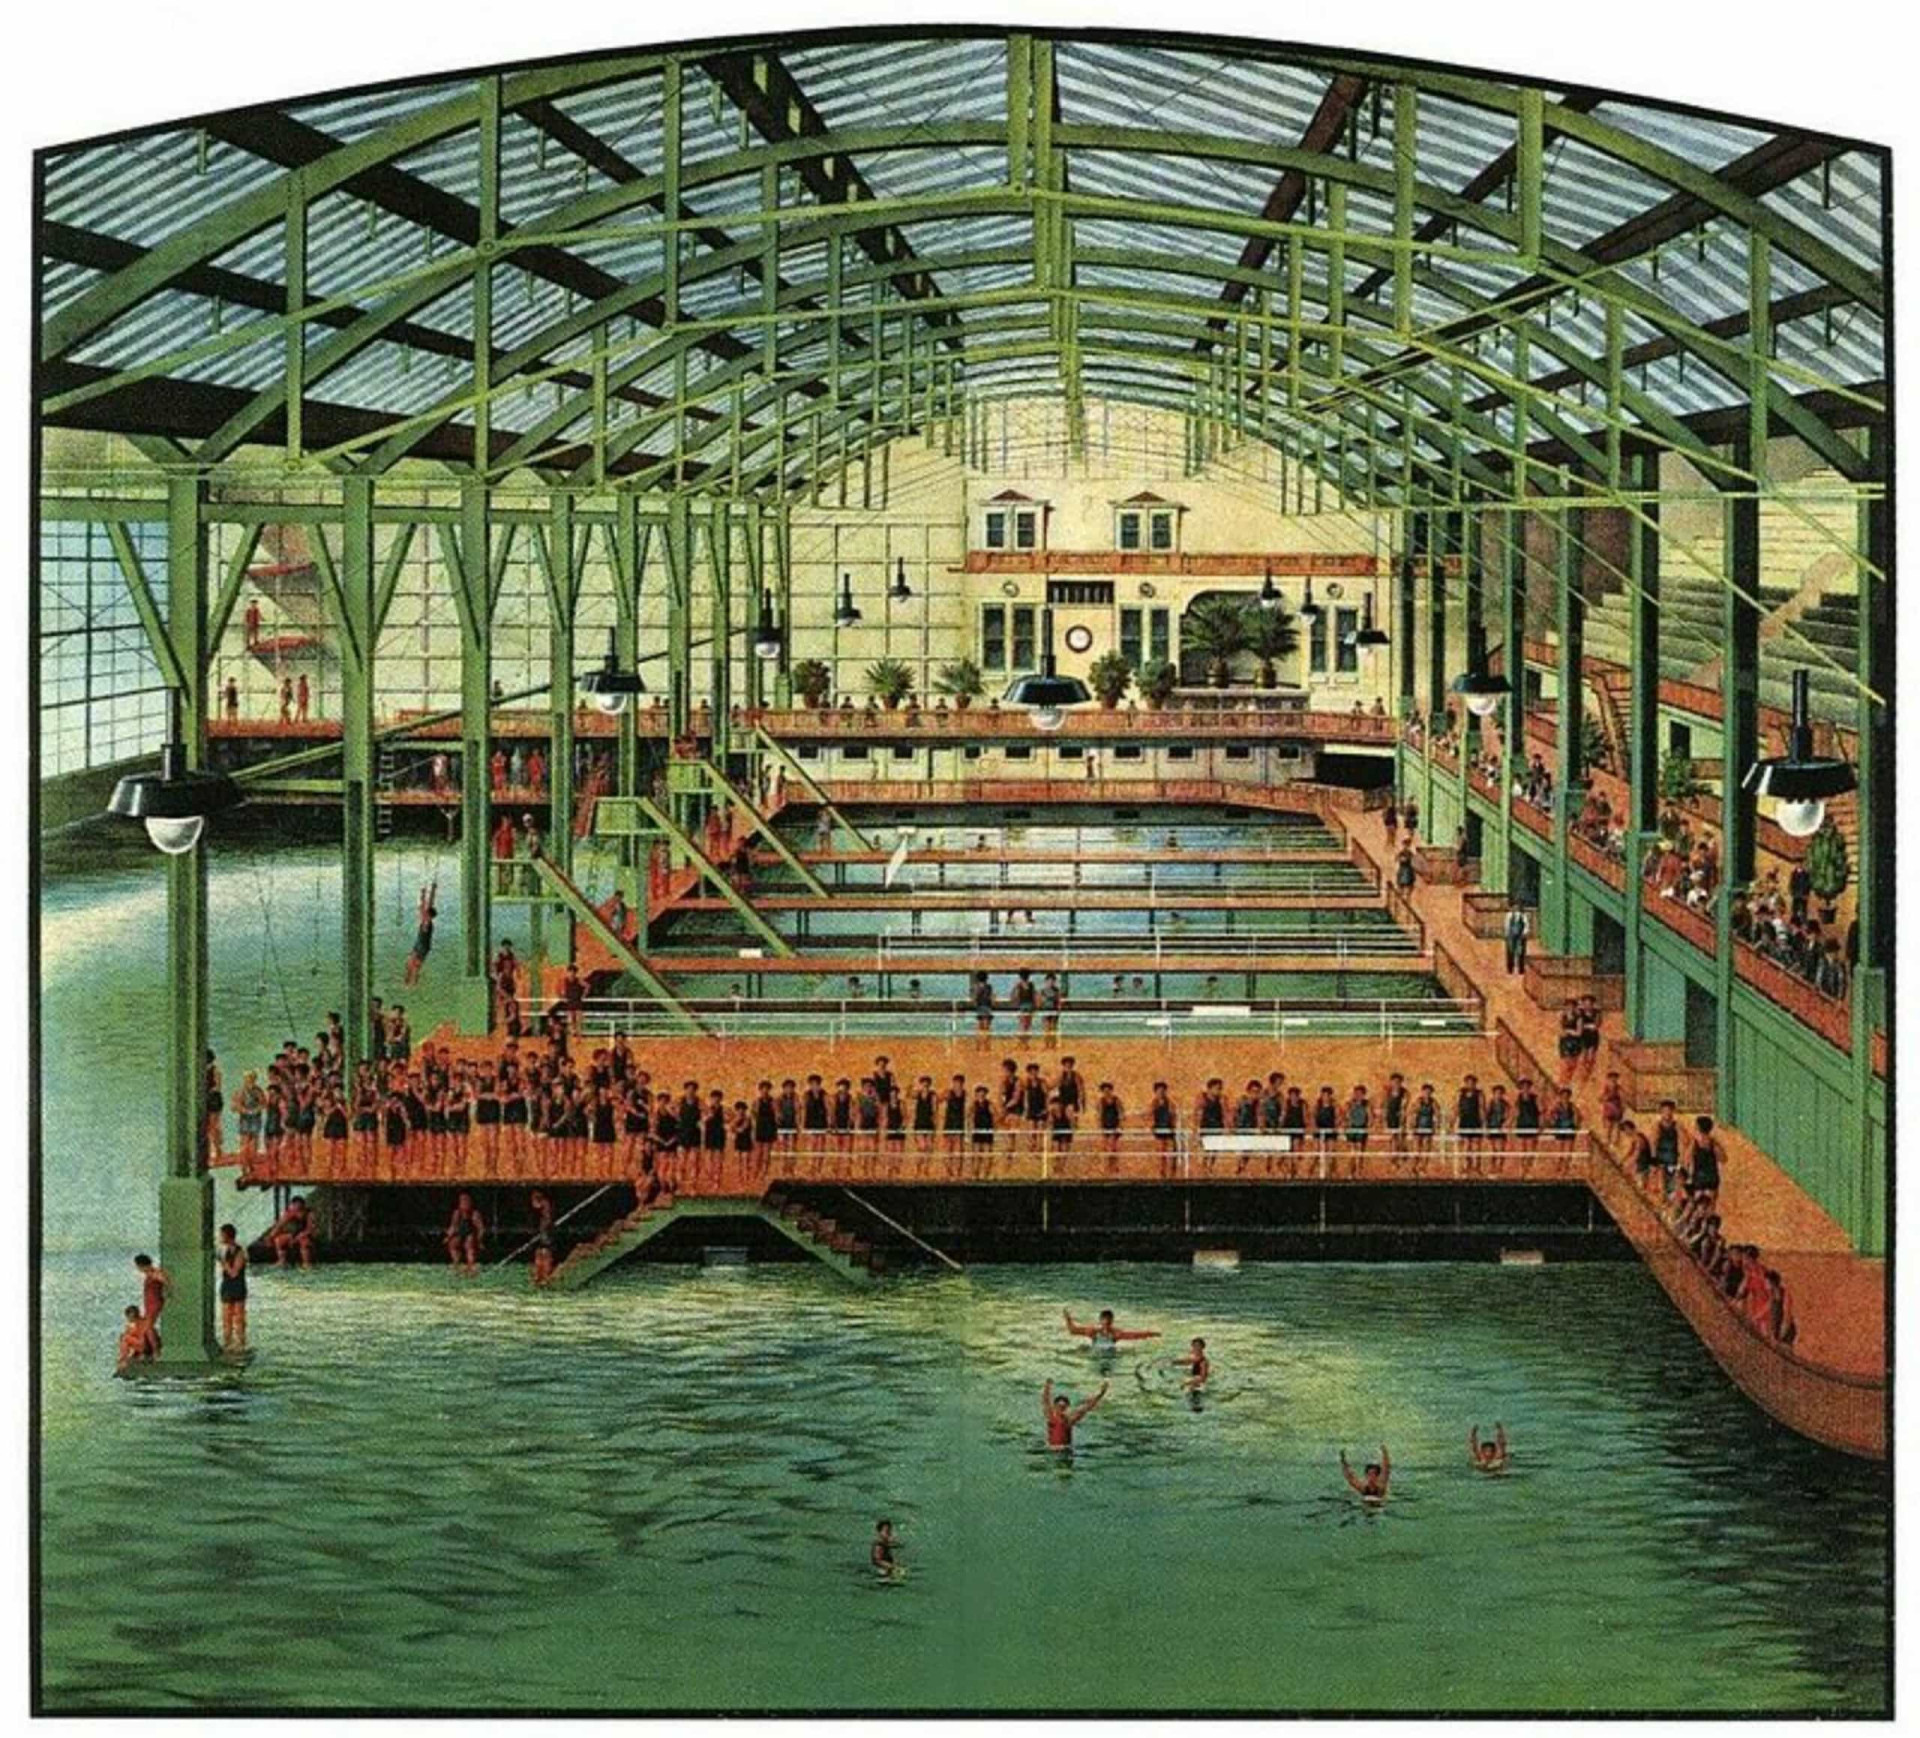 <p>Built in 1896, Sutro Baths, a huge saltwater bathing complex located in San Francisco, was the world's largest indoor swimming pool facility. Amenities also included a museum, amphitheater, and ice rink. It burned down in 1966, with its ruins today lying within the Sutro Historic District.</p><p>You may also like:<a href="https://www.starsinsider.com/n/497872?utm_source=msn.com&utm_medium=display&utm_campaign=referral_description&utm_content=668561en-my"> History's most celebrated crime fighters</a></p>